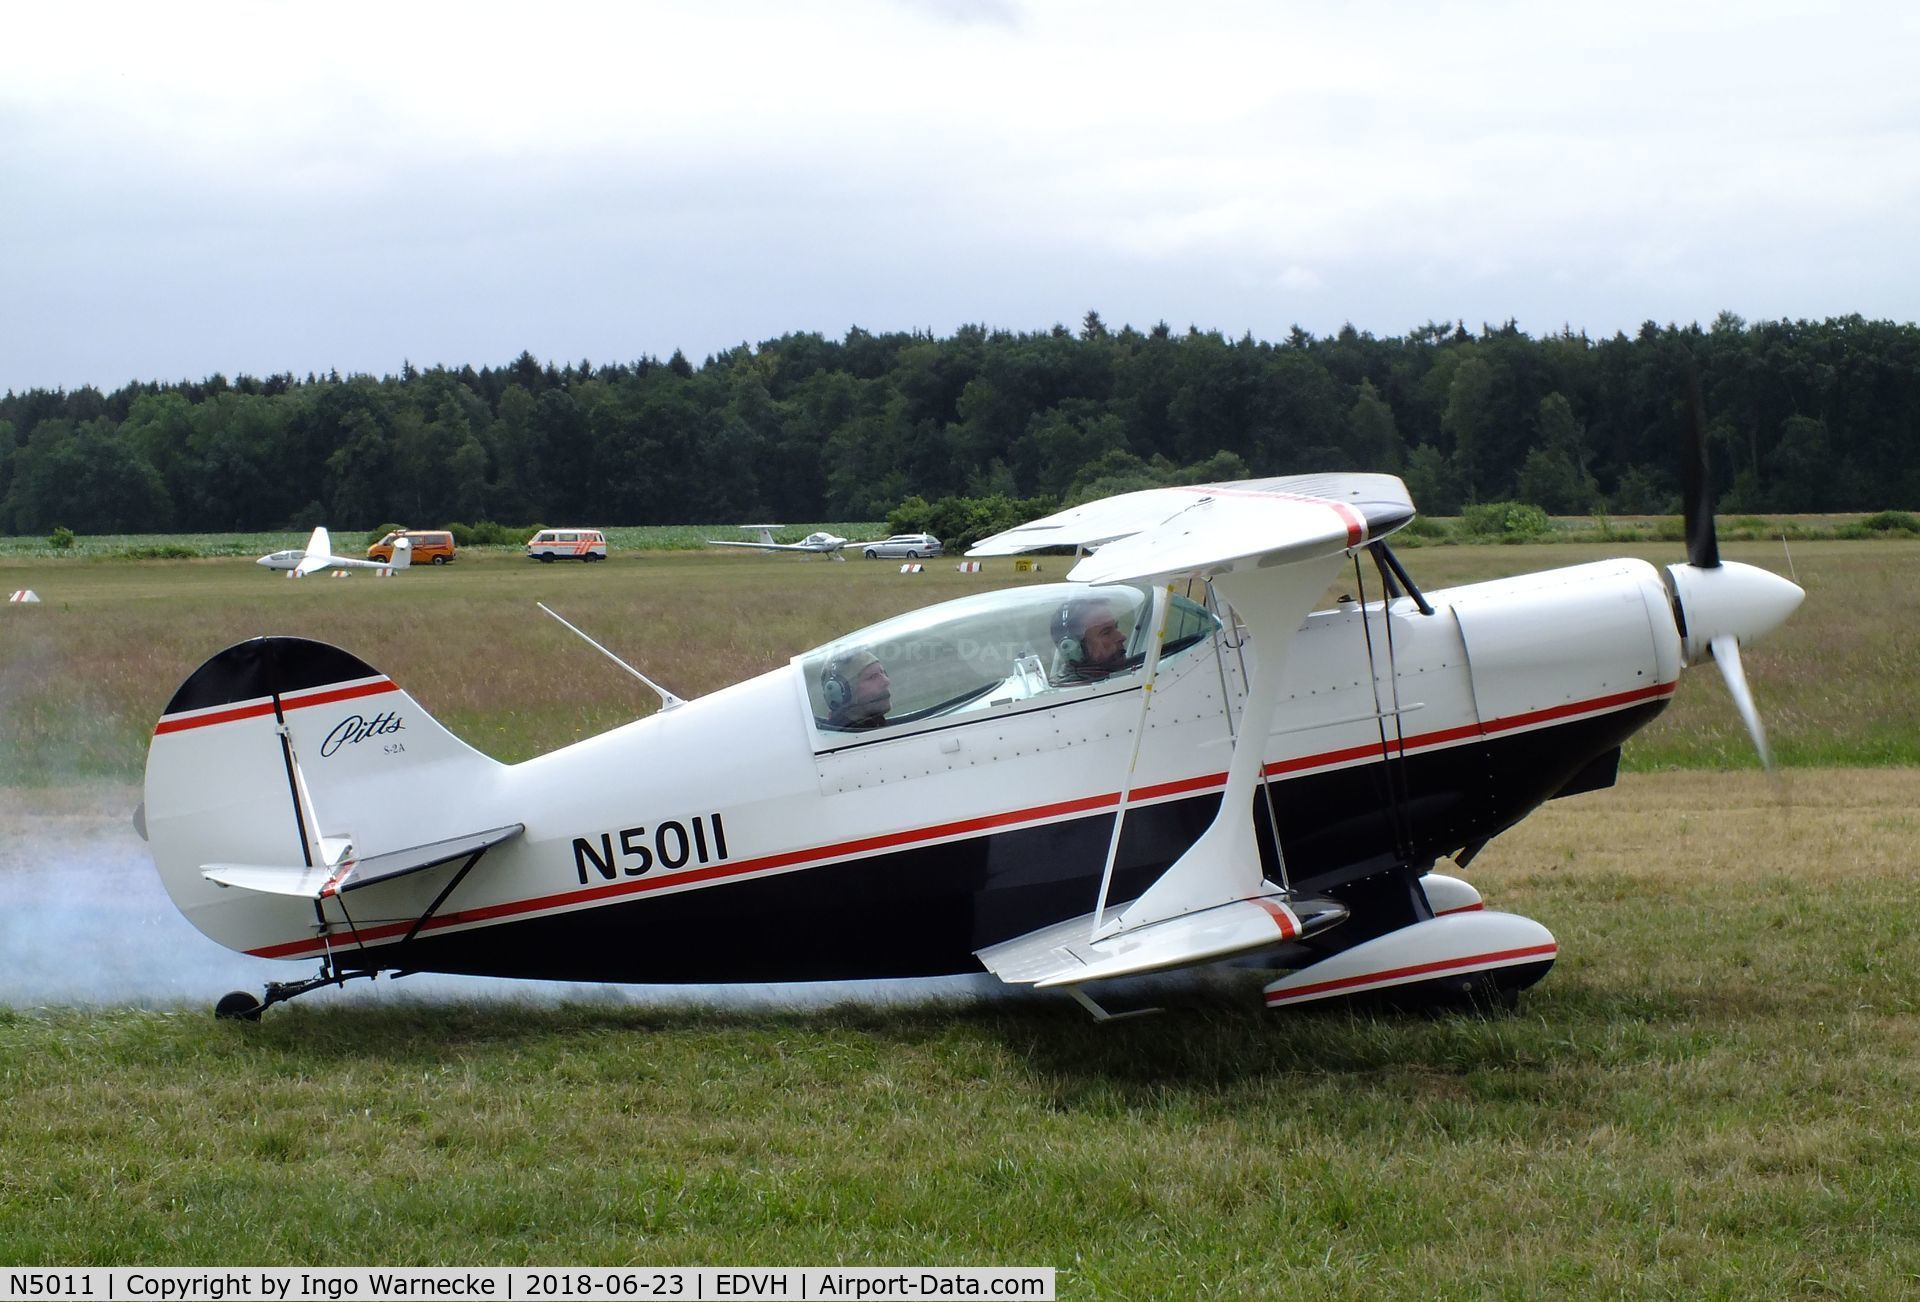 N5011, Aerotek Pitts S-2A2 Special C/N 2188, Aerotec Pitts S-2A Special at the 2018 OUV-Meeting at Hodenhagen airfield